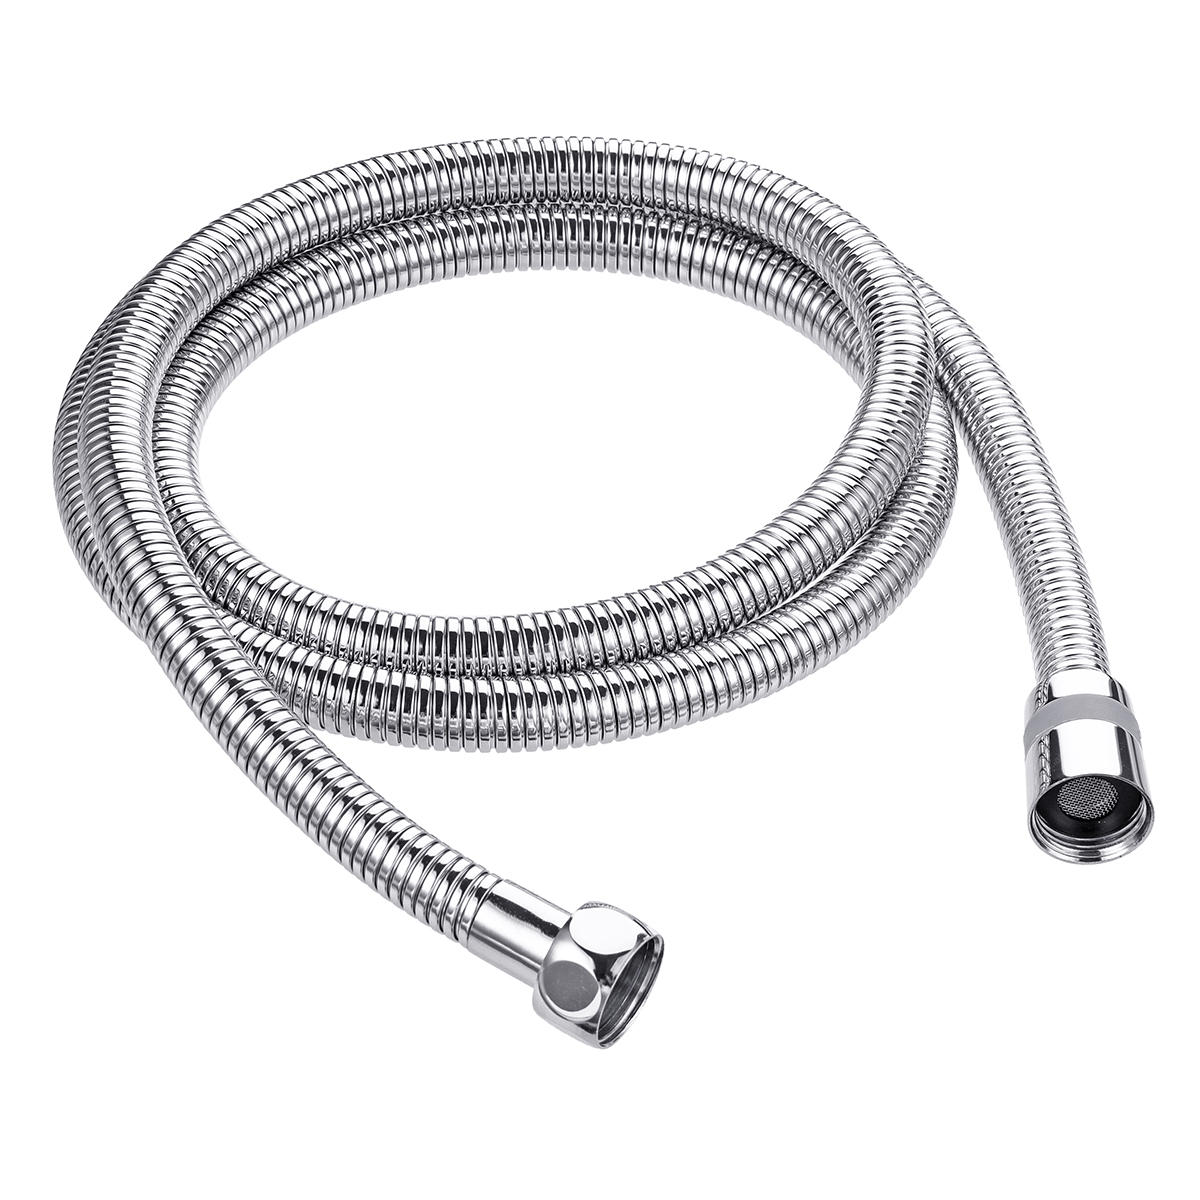 1.5m Flexible Handheld Shower Head Hose Dense Structure Stainless Steel 360 Rotatable Connector